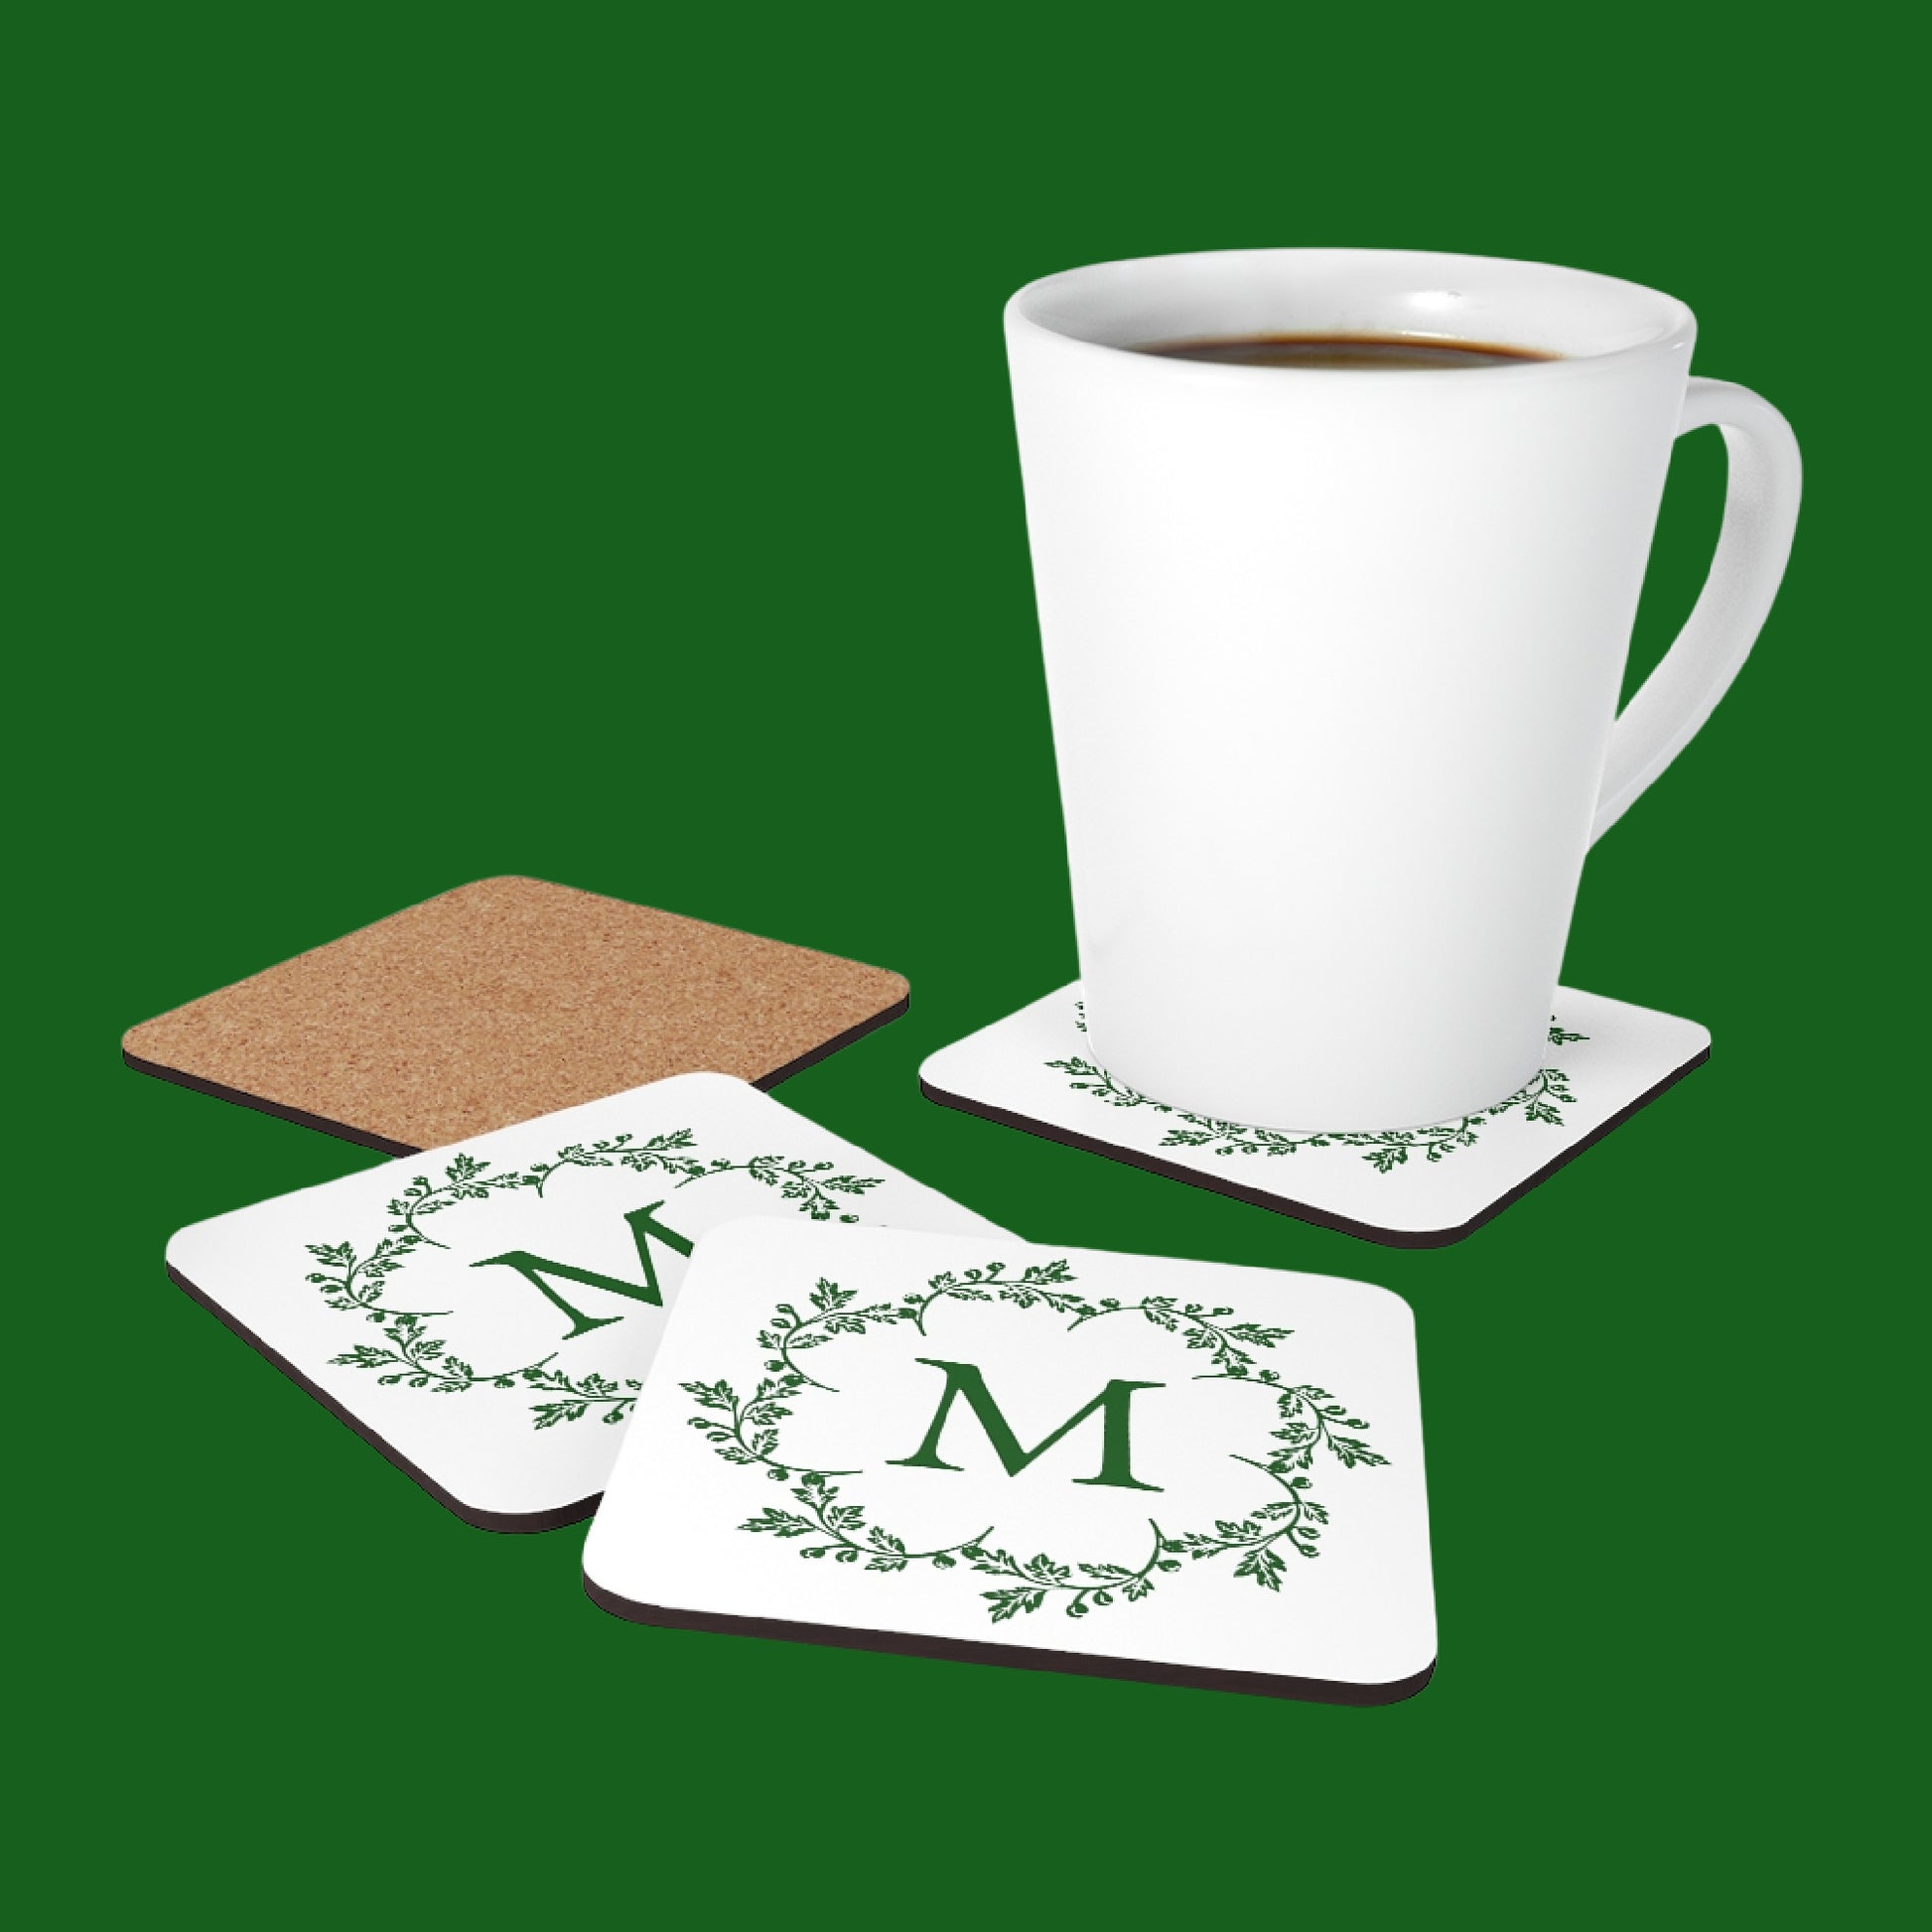 Mock up of a white latte mug on one of our Customized Monogrammed Coasters surrounded by 3 others